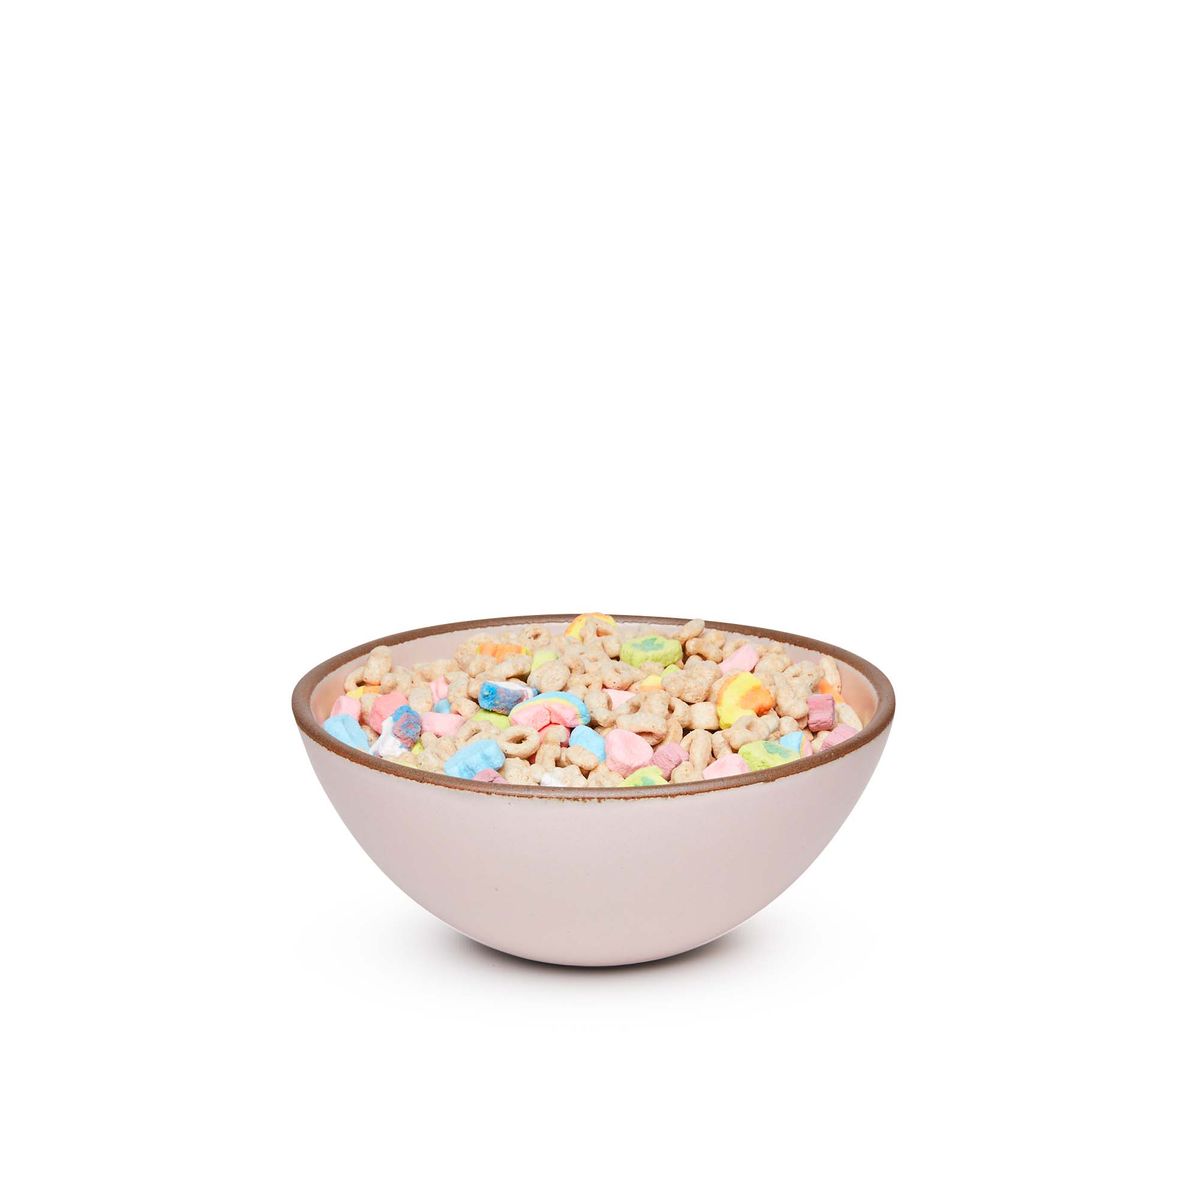 A medium rounded ceramic bowl in a soft light pink color featuring iron speckles and an unglazed rim, filled with cereal